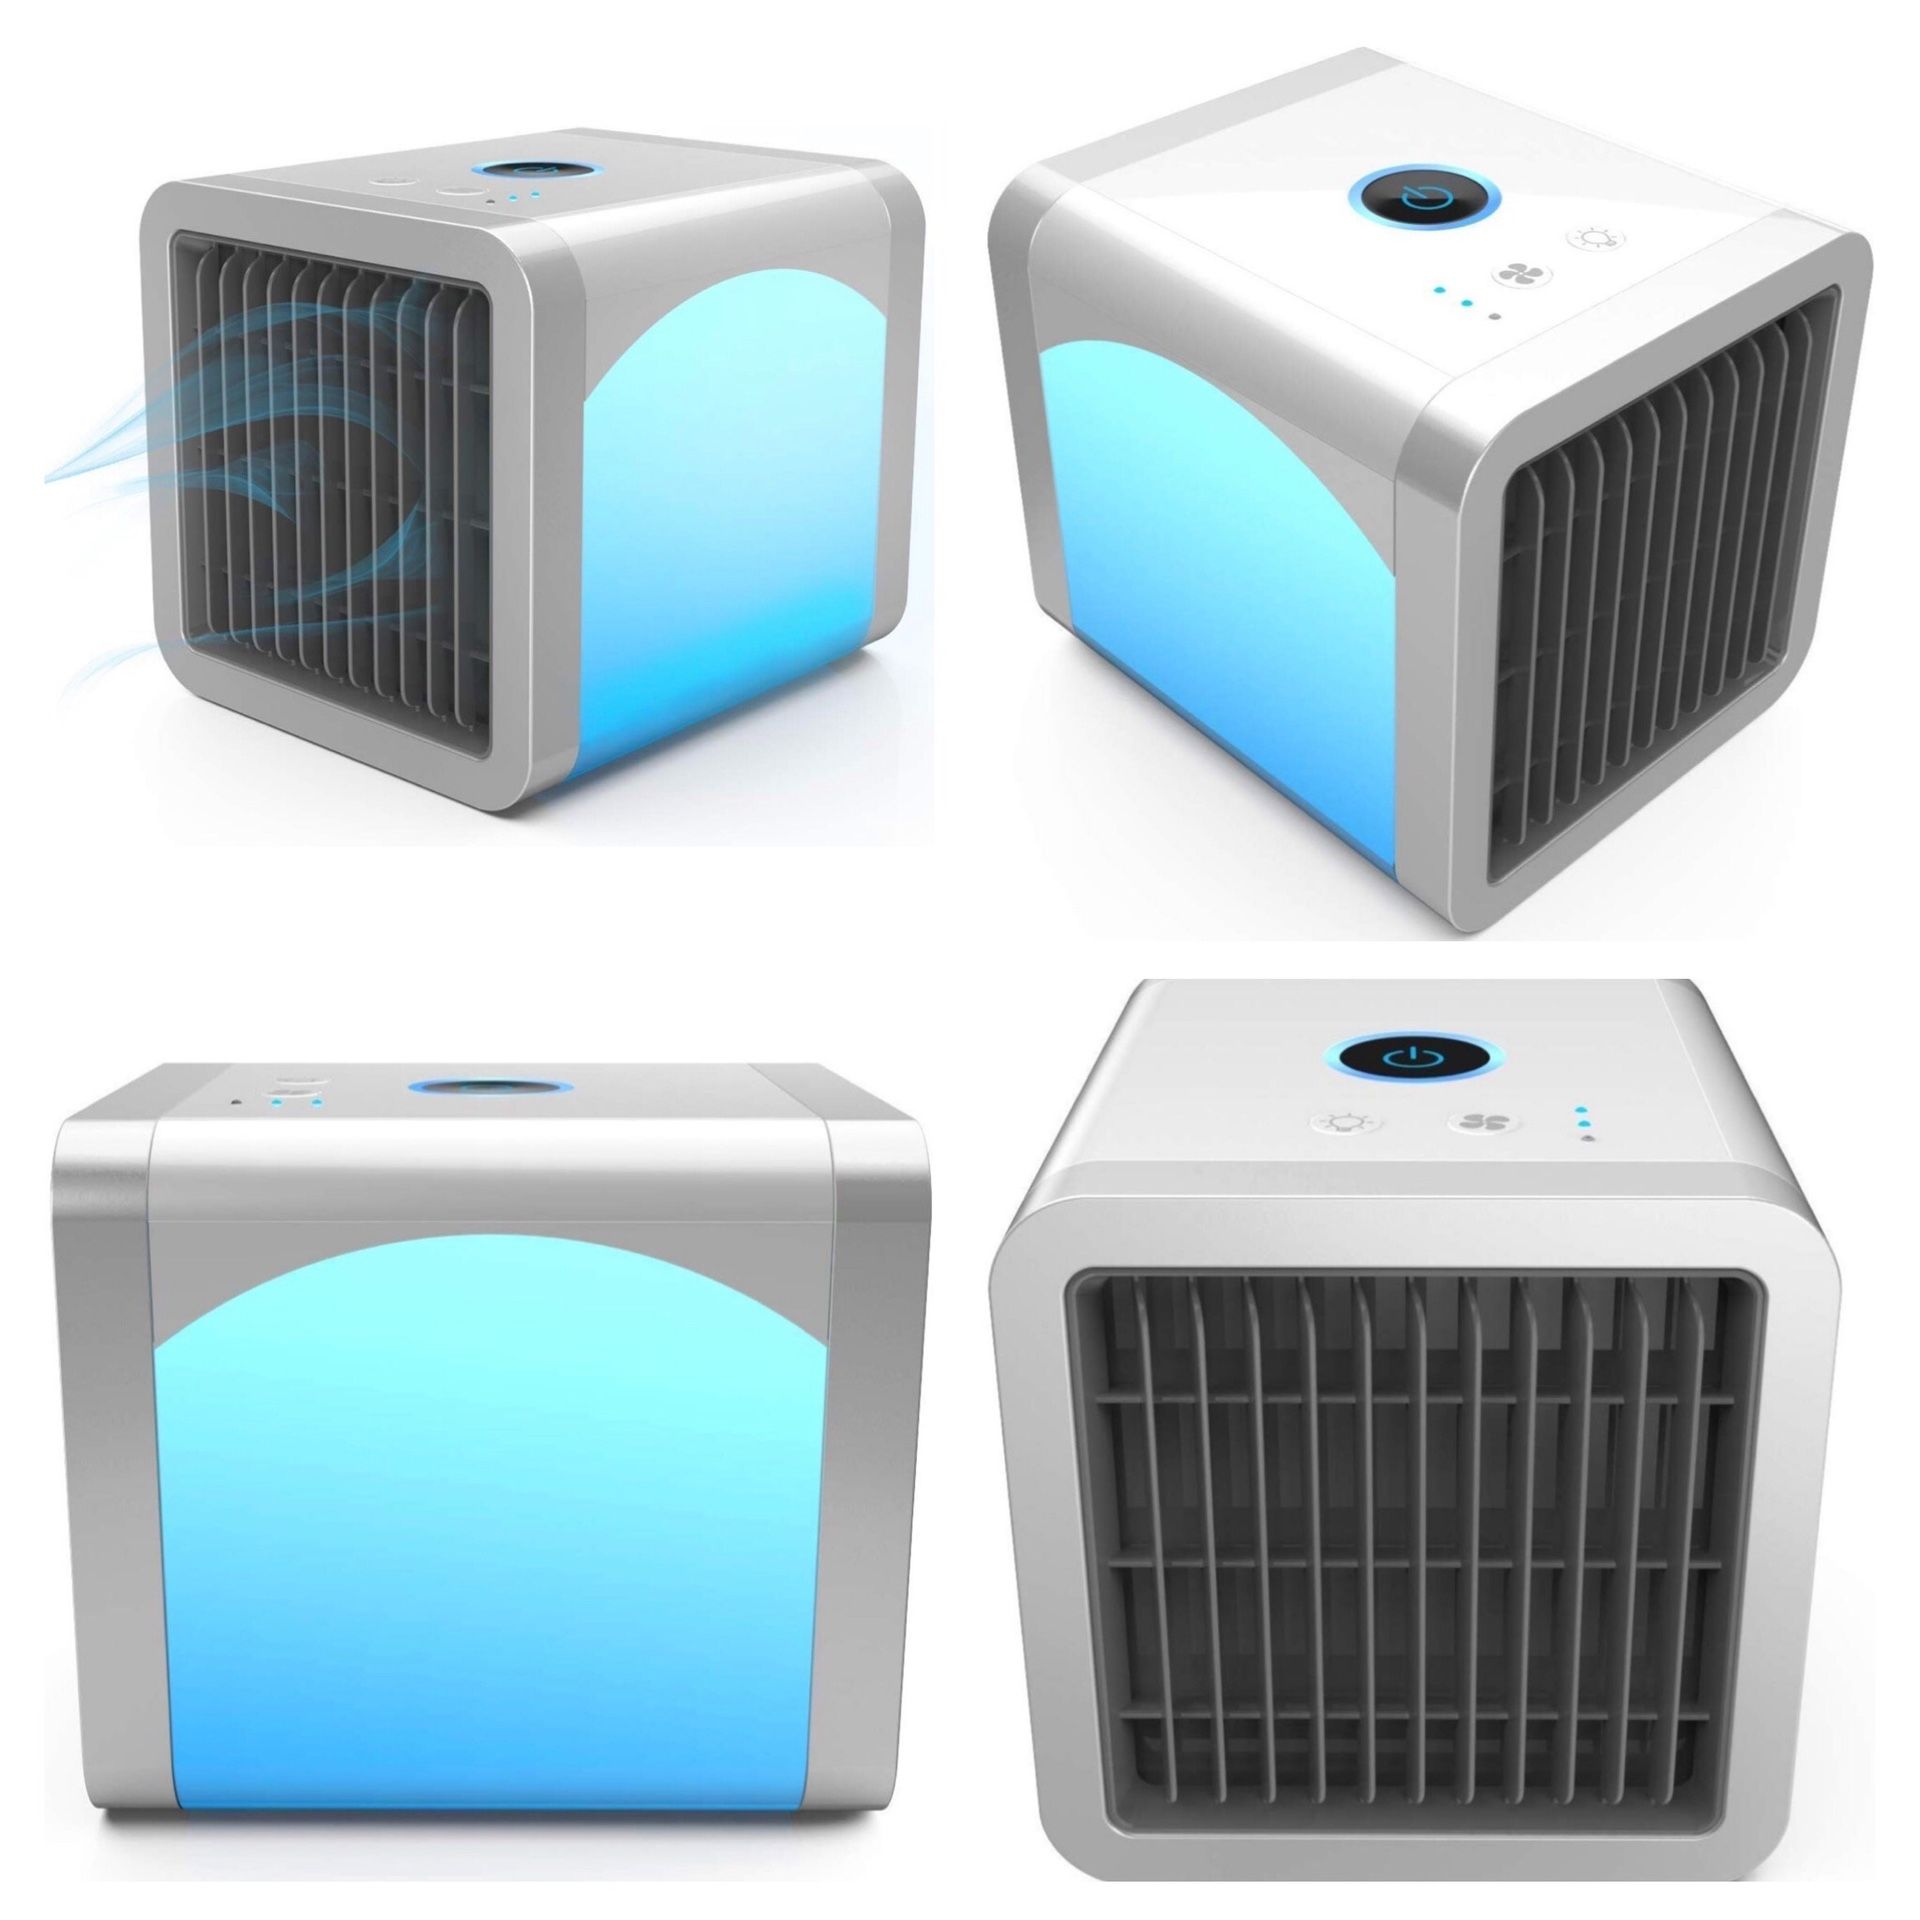 Heartbeat Personal Air Cooler, Personal Air Conditioner for Office Desk, Small Portable AC Air Conditioner, with Built-in LED Night Light